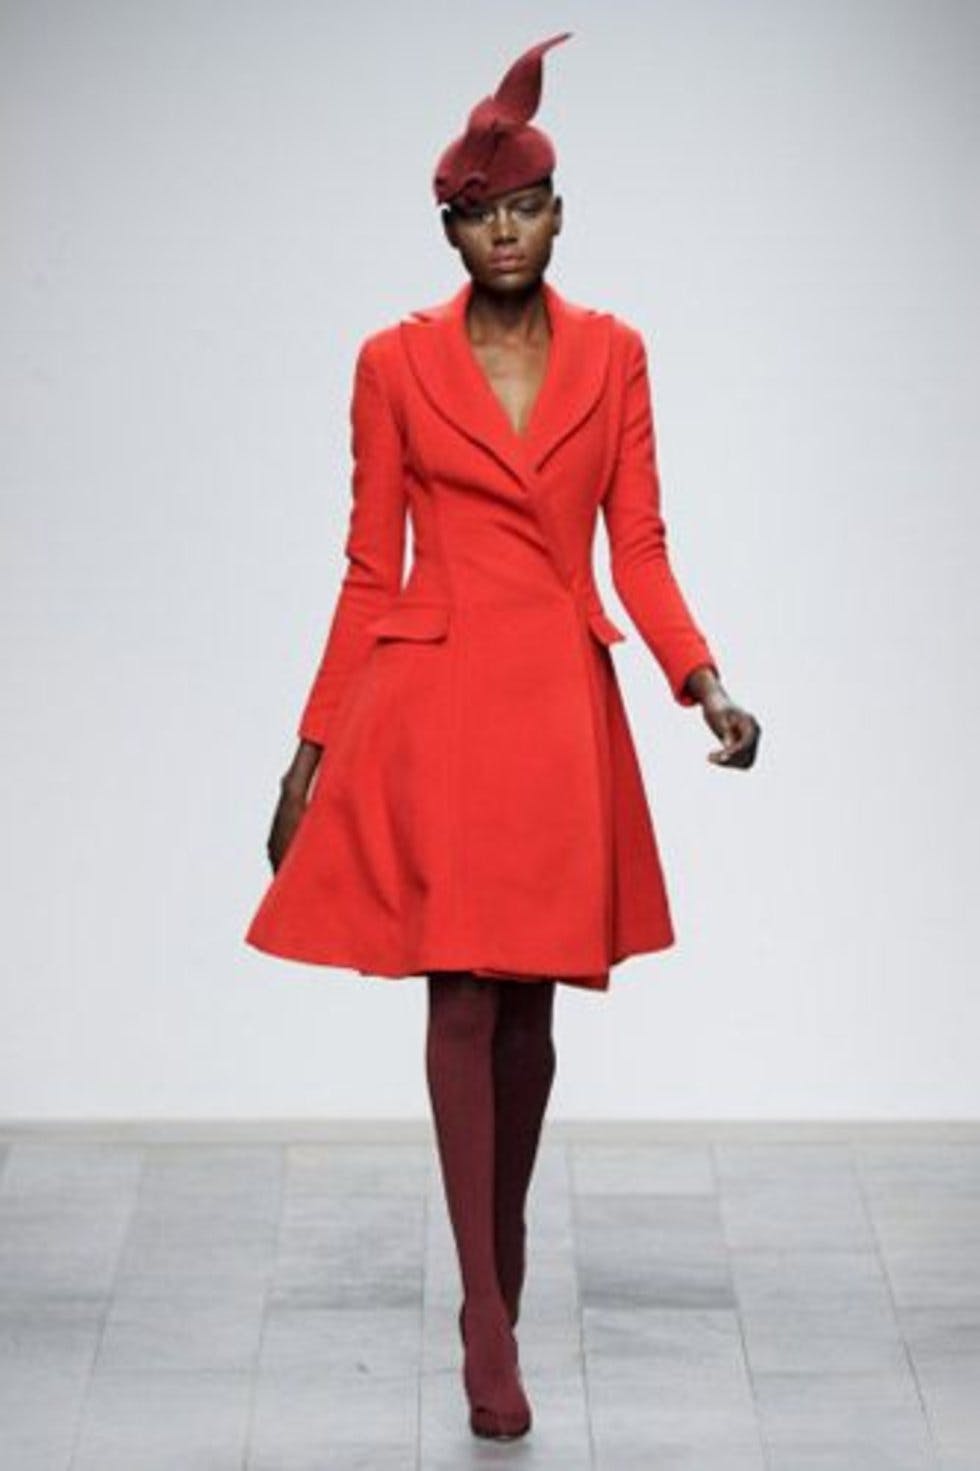 Issa A/W 2011: Pictures of all the looks from the catwalk show | Stylist